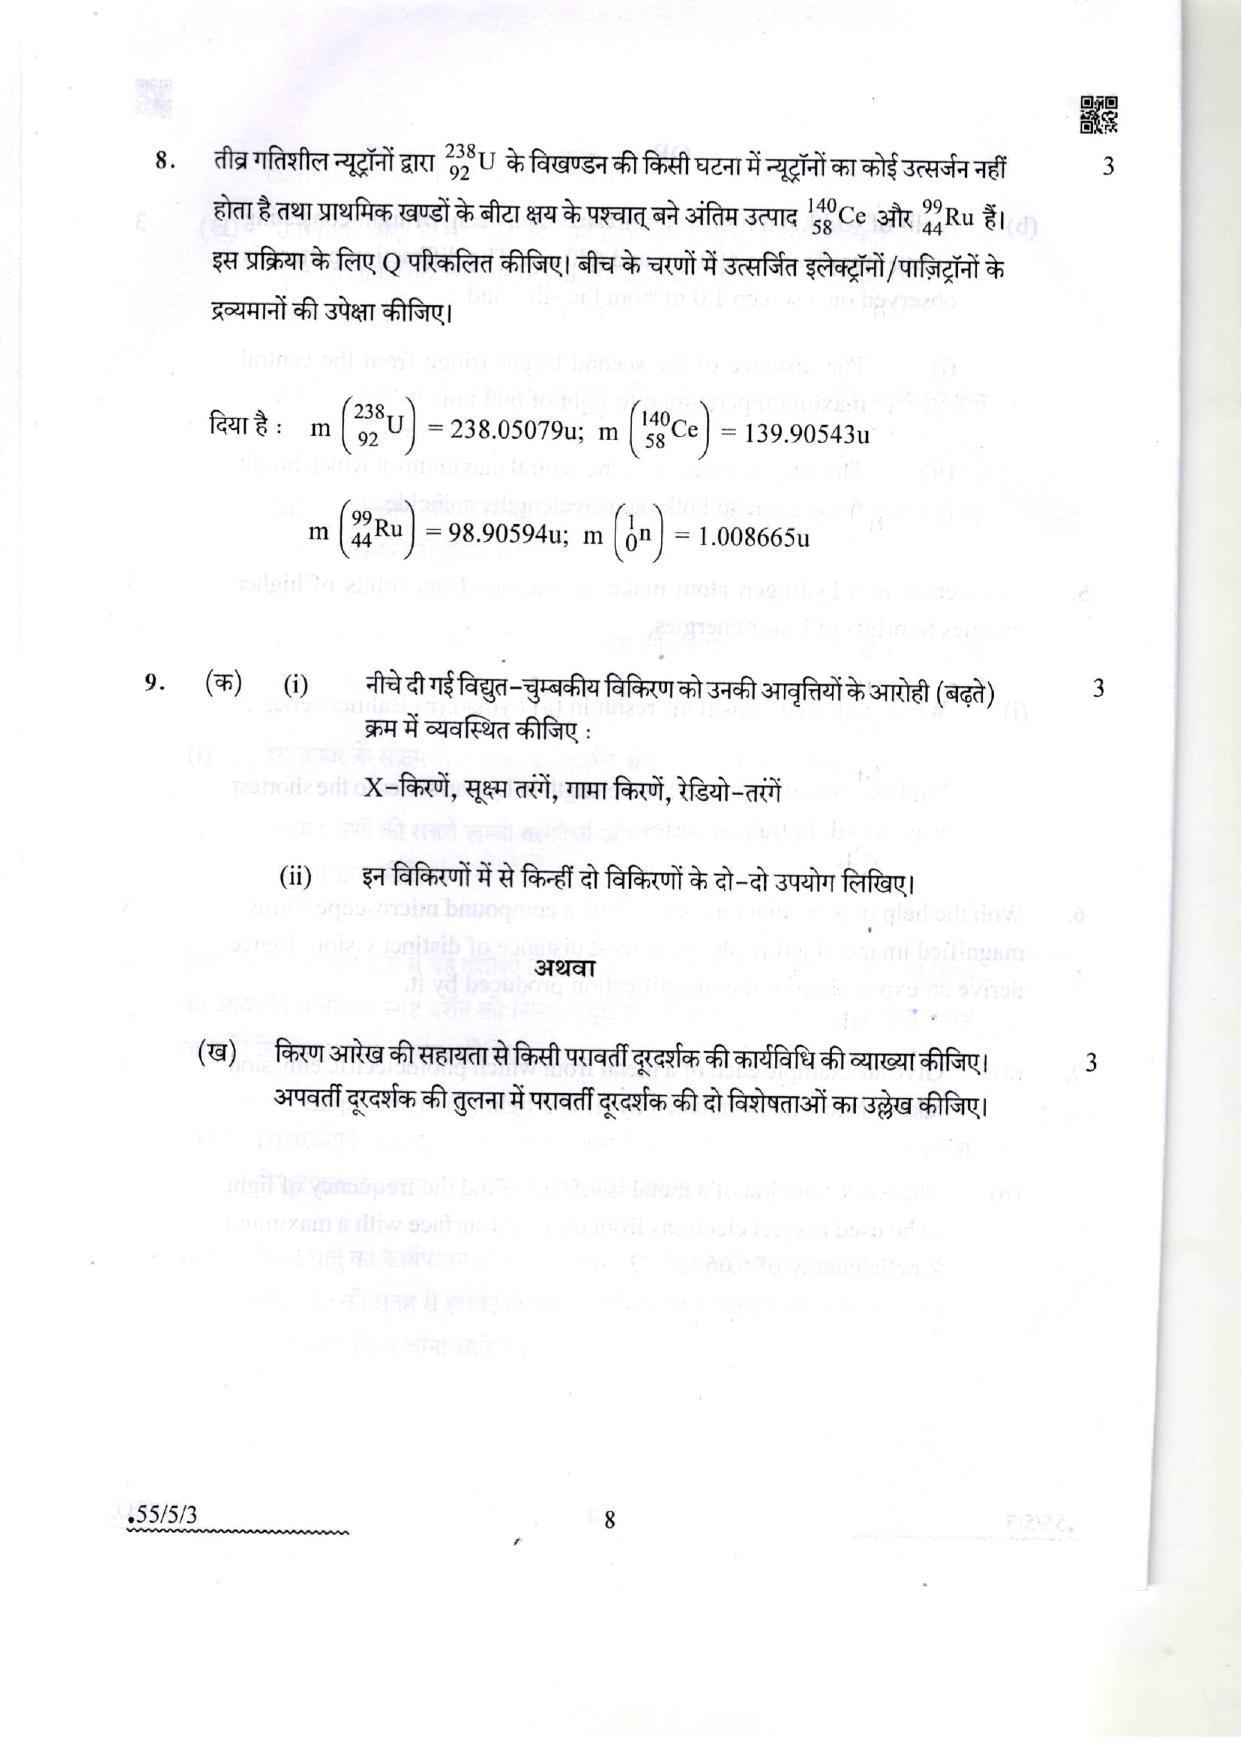 CBSE Class 12 55-5-3 Physics 2022 Question Paper - Page 8